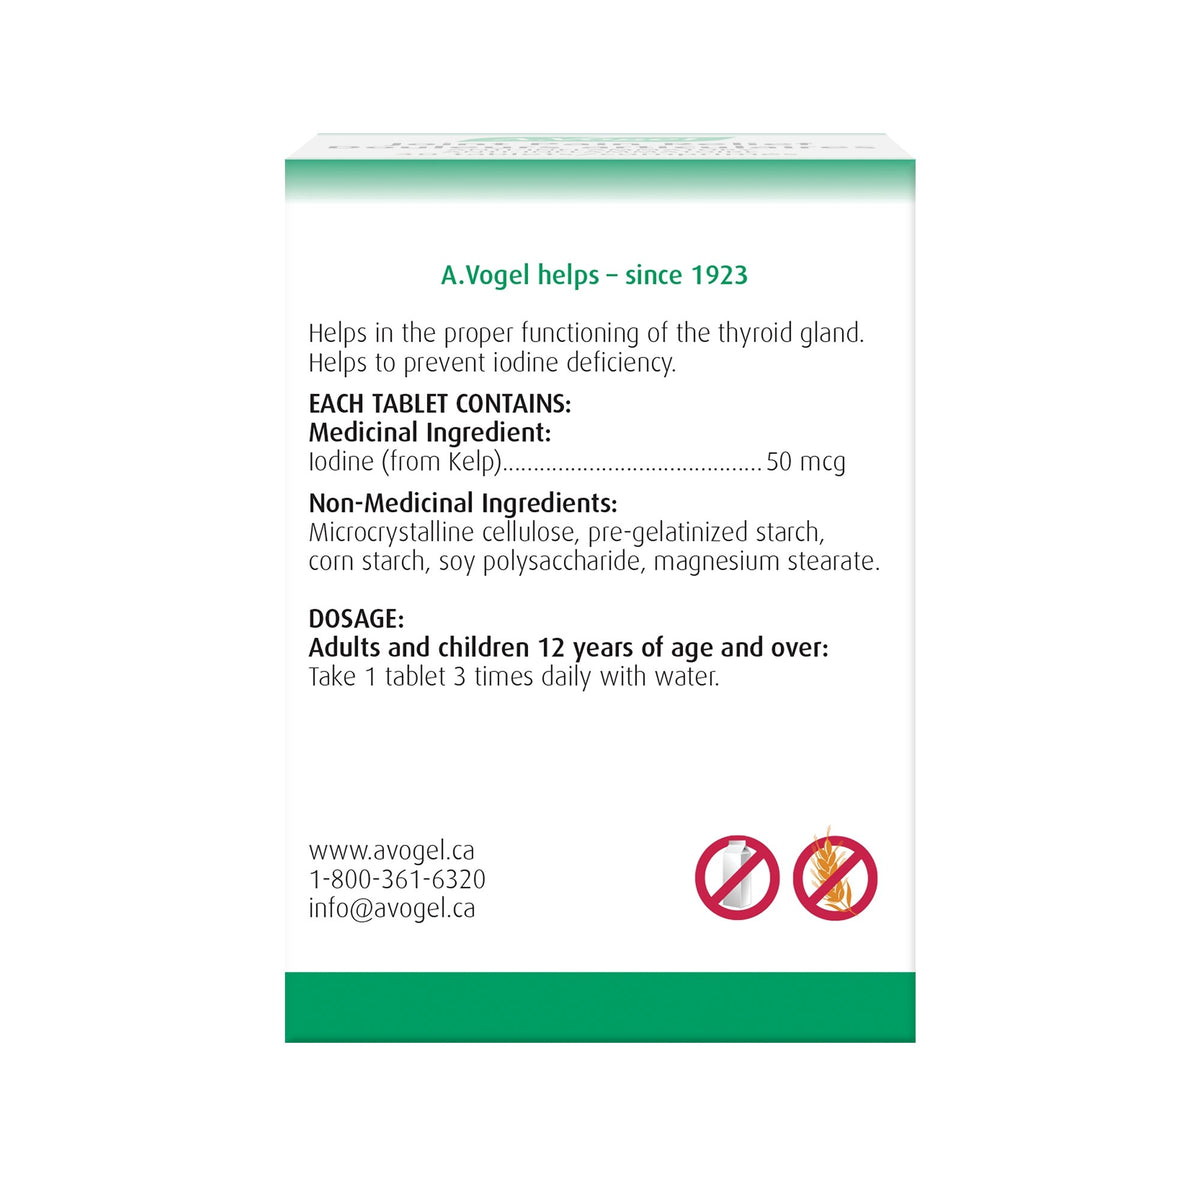 Thyroid Support - Prevents Iodine Deficiency 150 Tabs - A.Vogel Canada